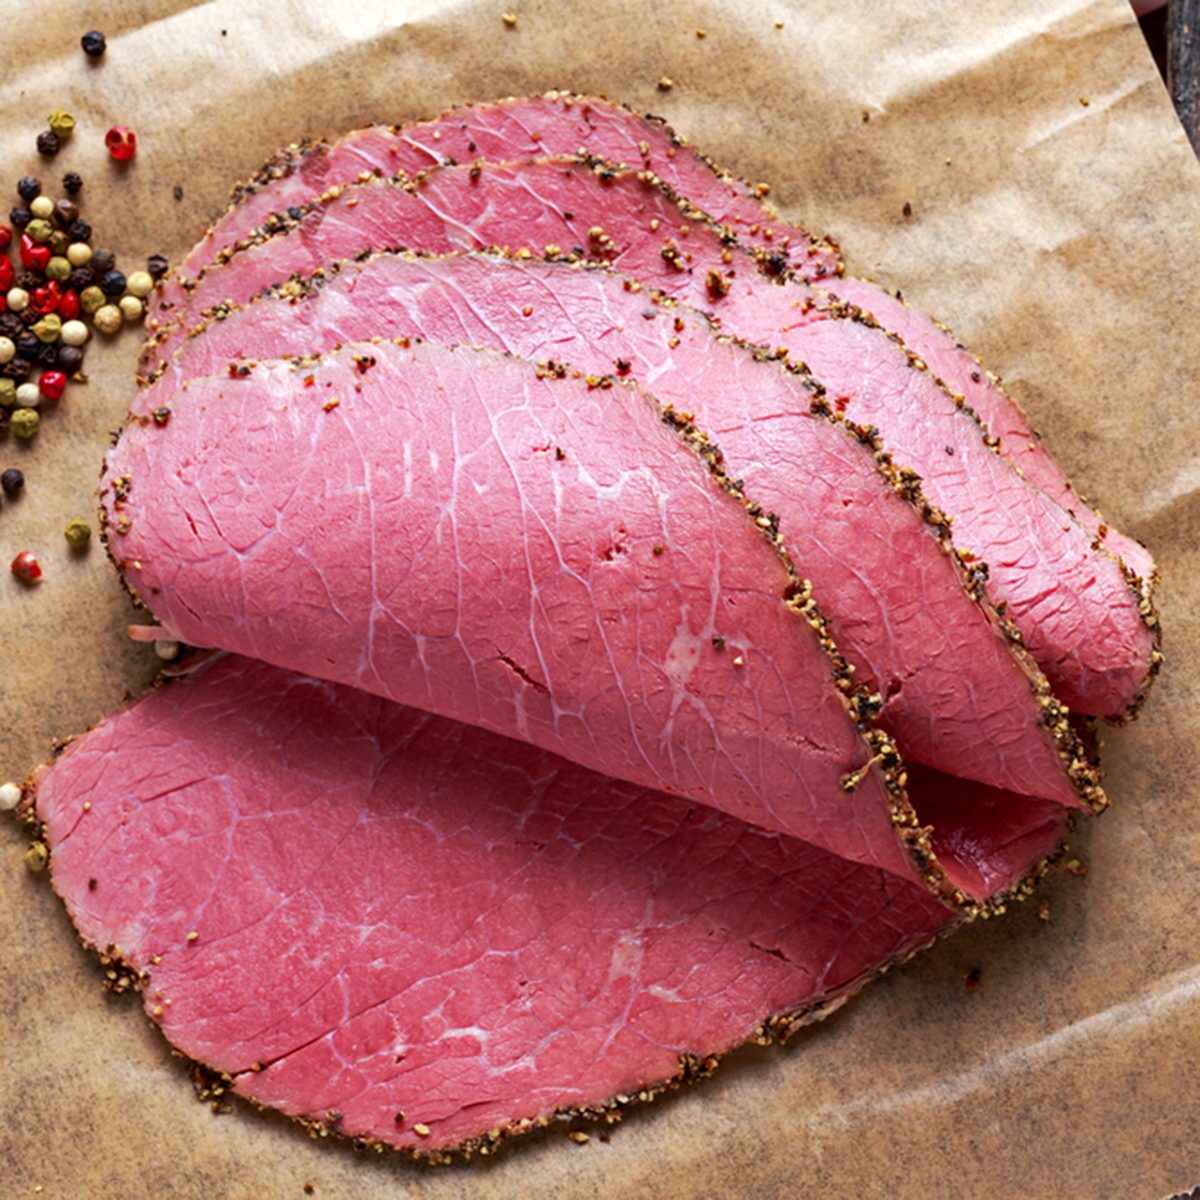 Peppered roast beef pastrami slices on paper with grains of coloured pepper.